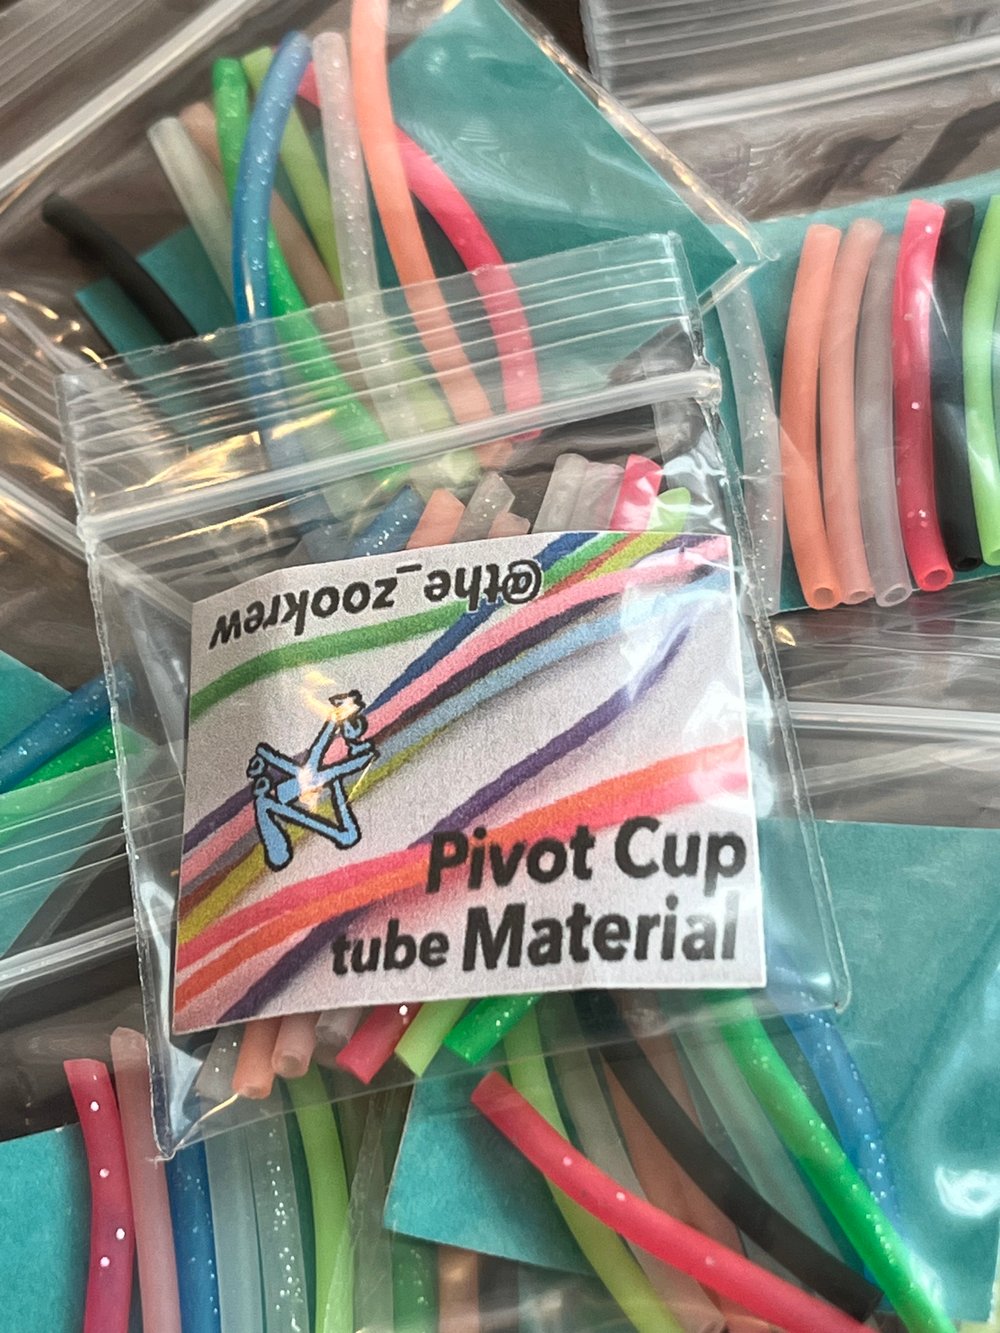 Pivot cup tube material